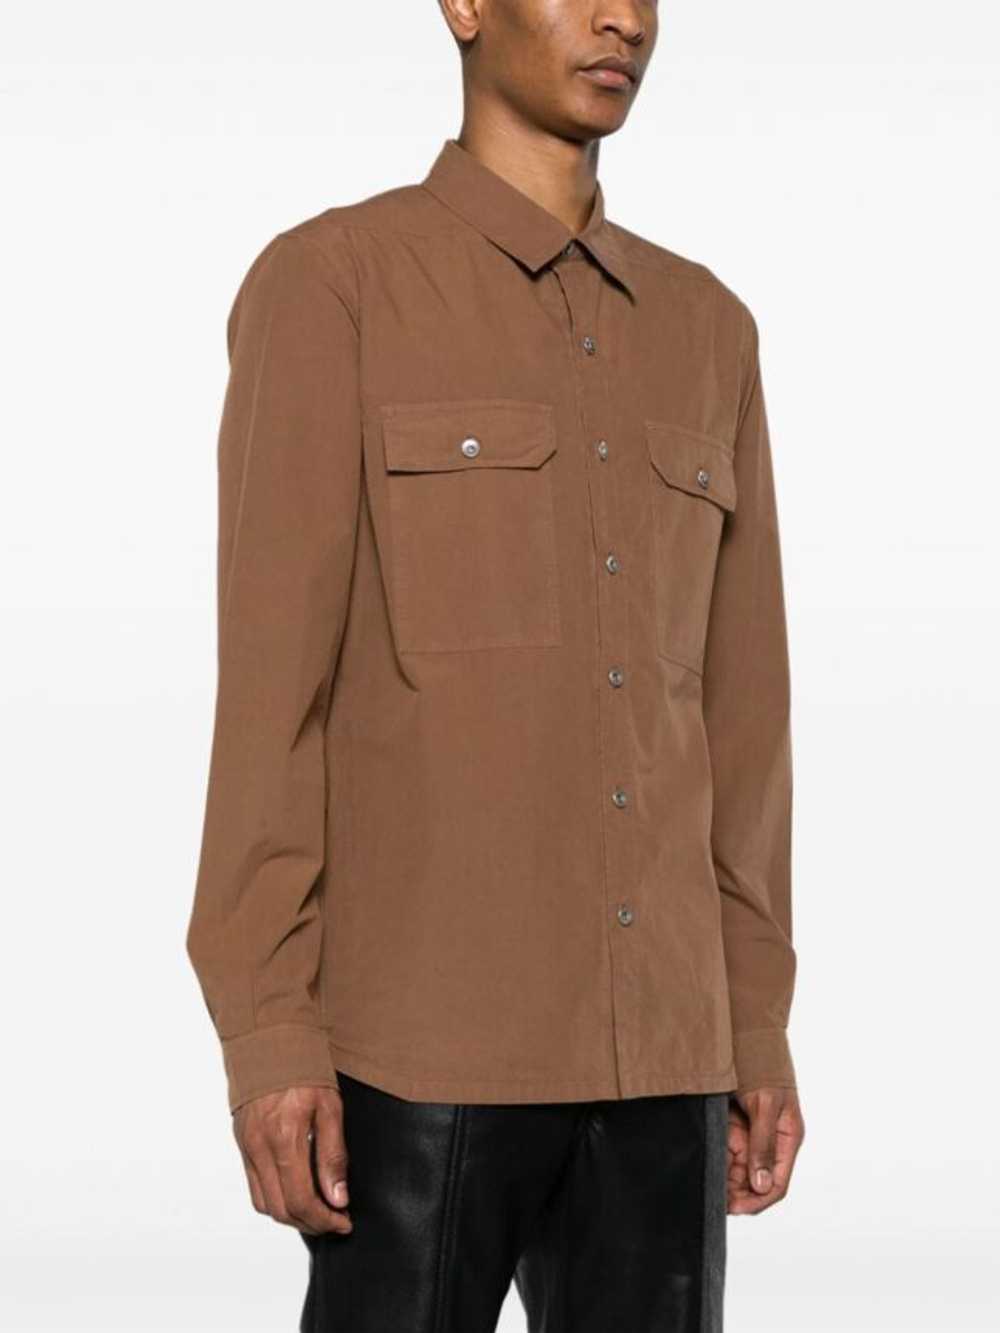 Rick Owens Drkshdw Outershirt - image 3